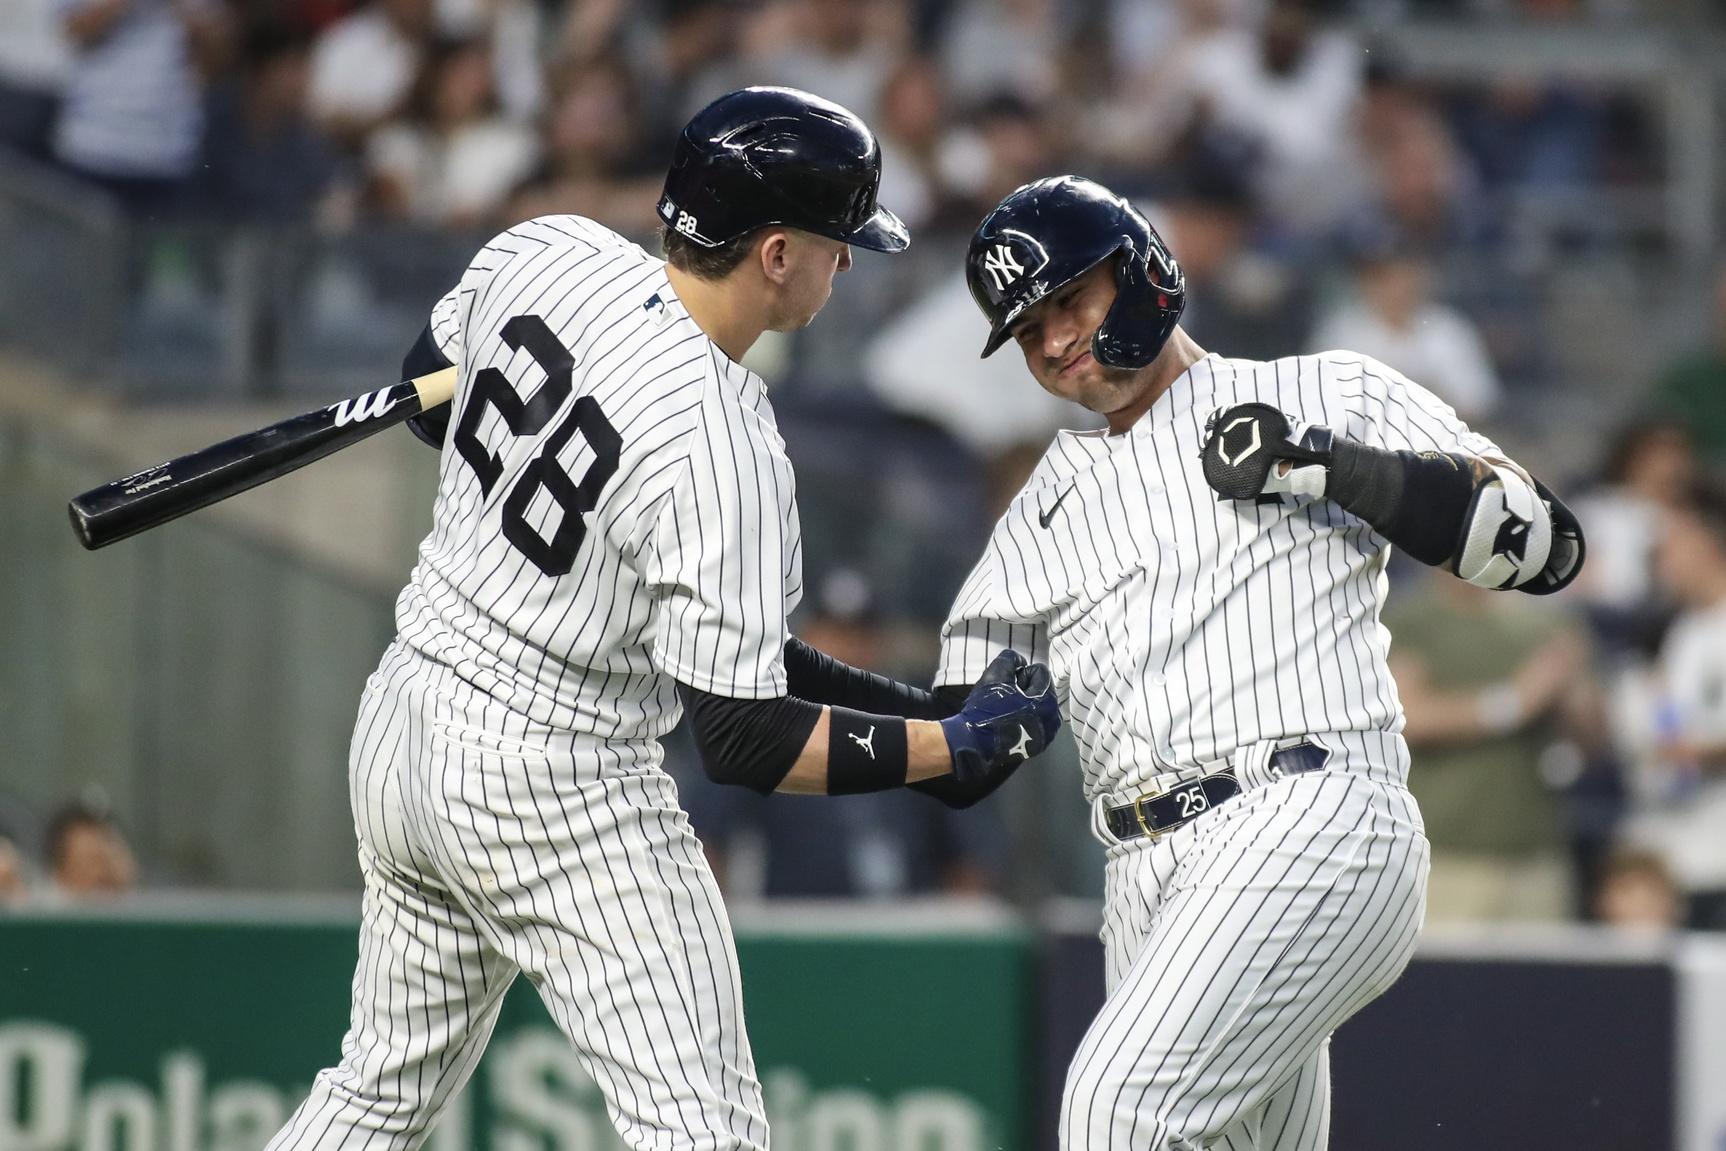 New York Yankees second baseman Gleyber Torres (25) celebrates with third baseman Josh Donaldson (28) after hitting a solo home run in the fourth inning against the Boston Red Sox at Yankee Stadium. / Wendell Cruz-USA TODAY Sports